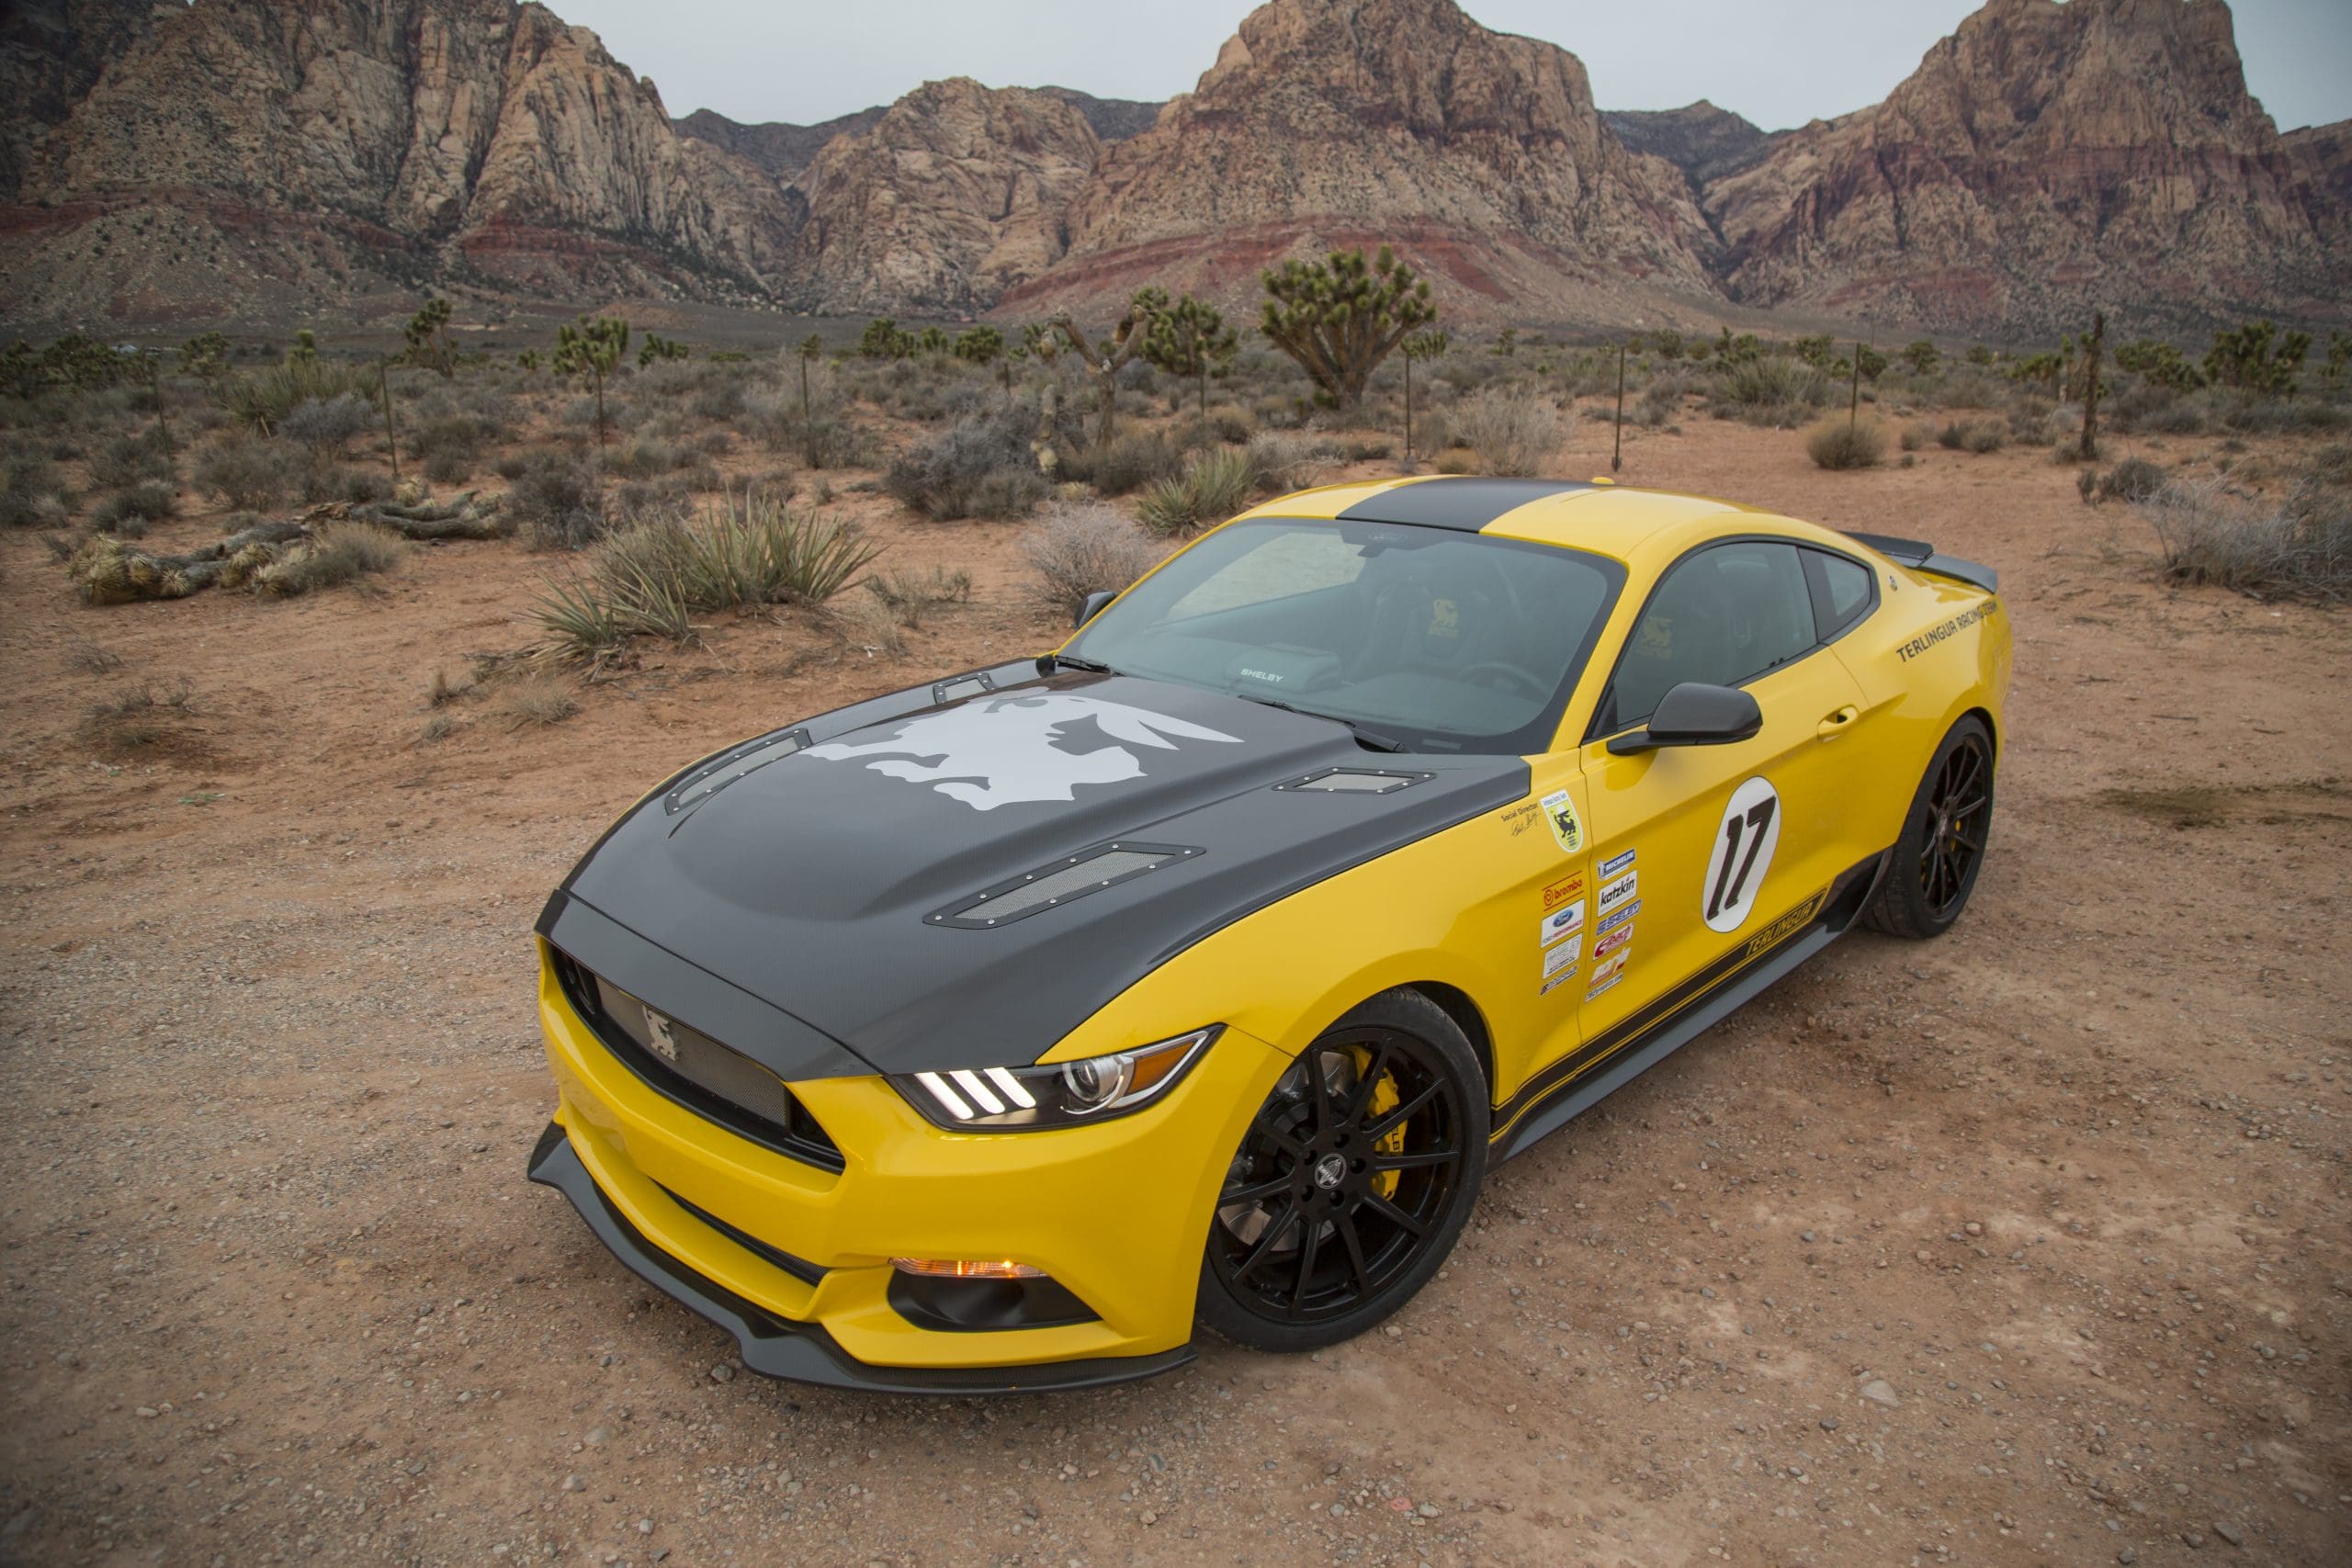 Mustang Of The Day: 2016 Ford Mustang Shelby Terlingua